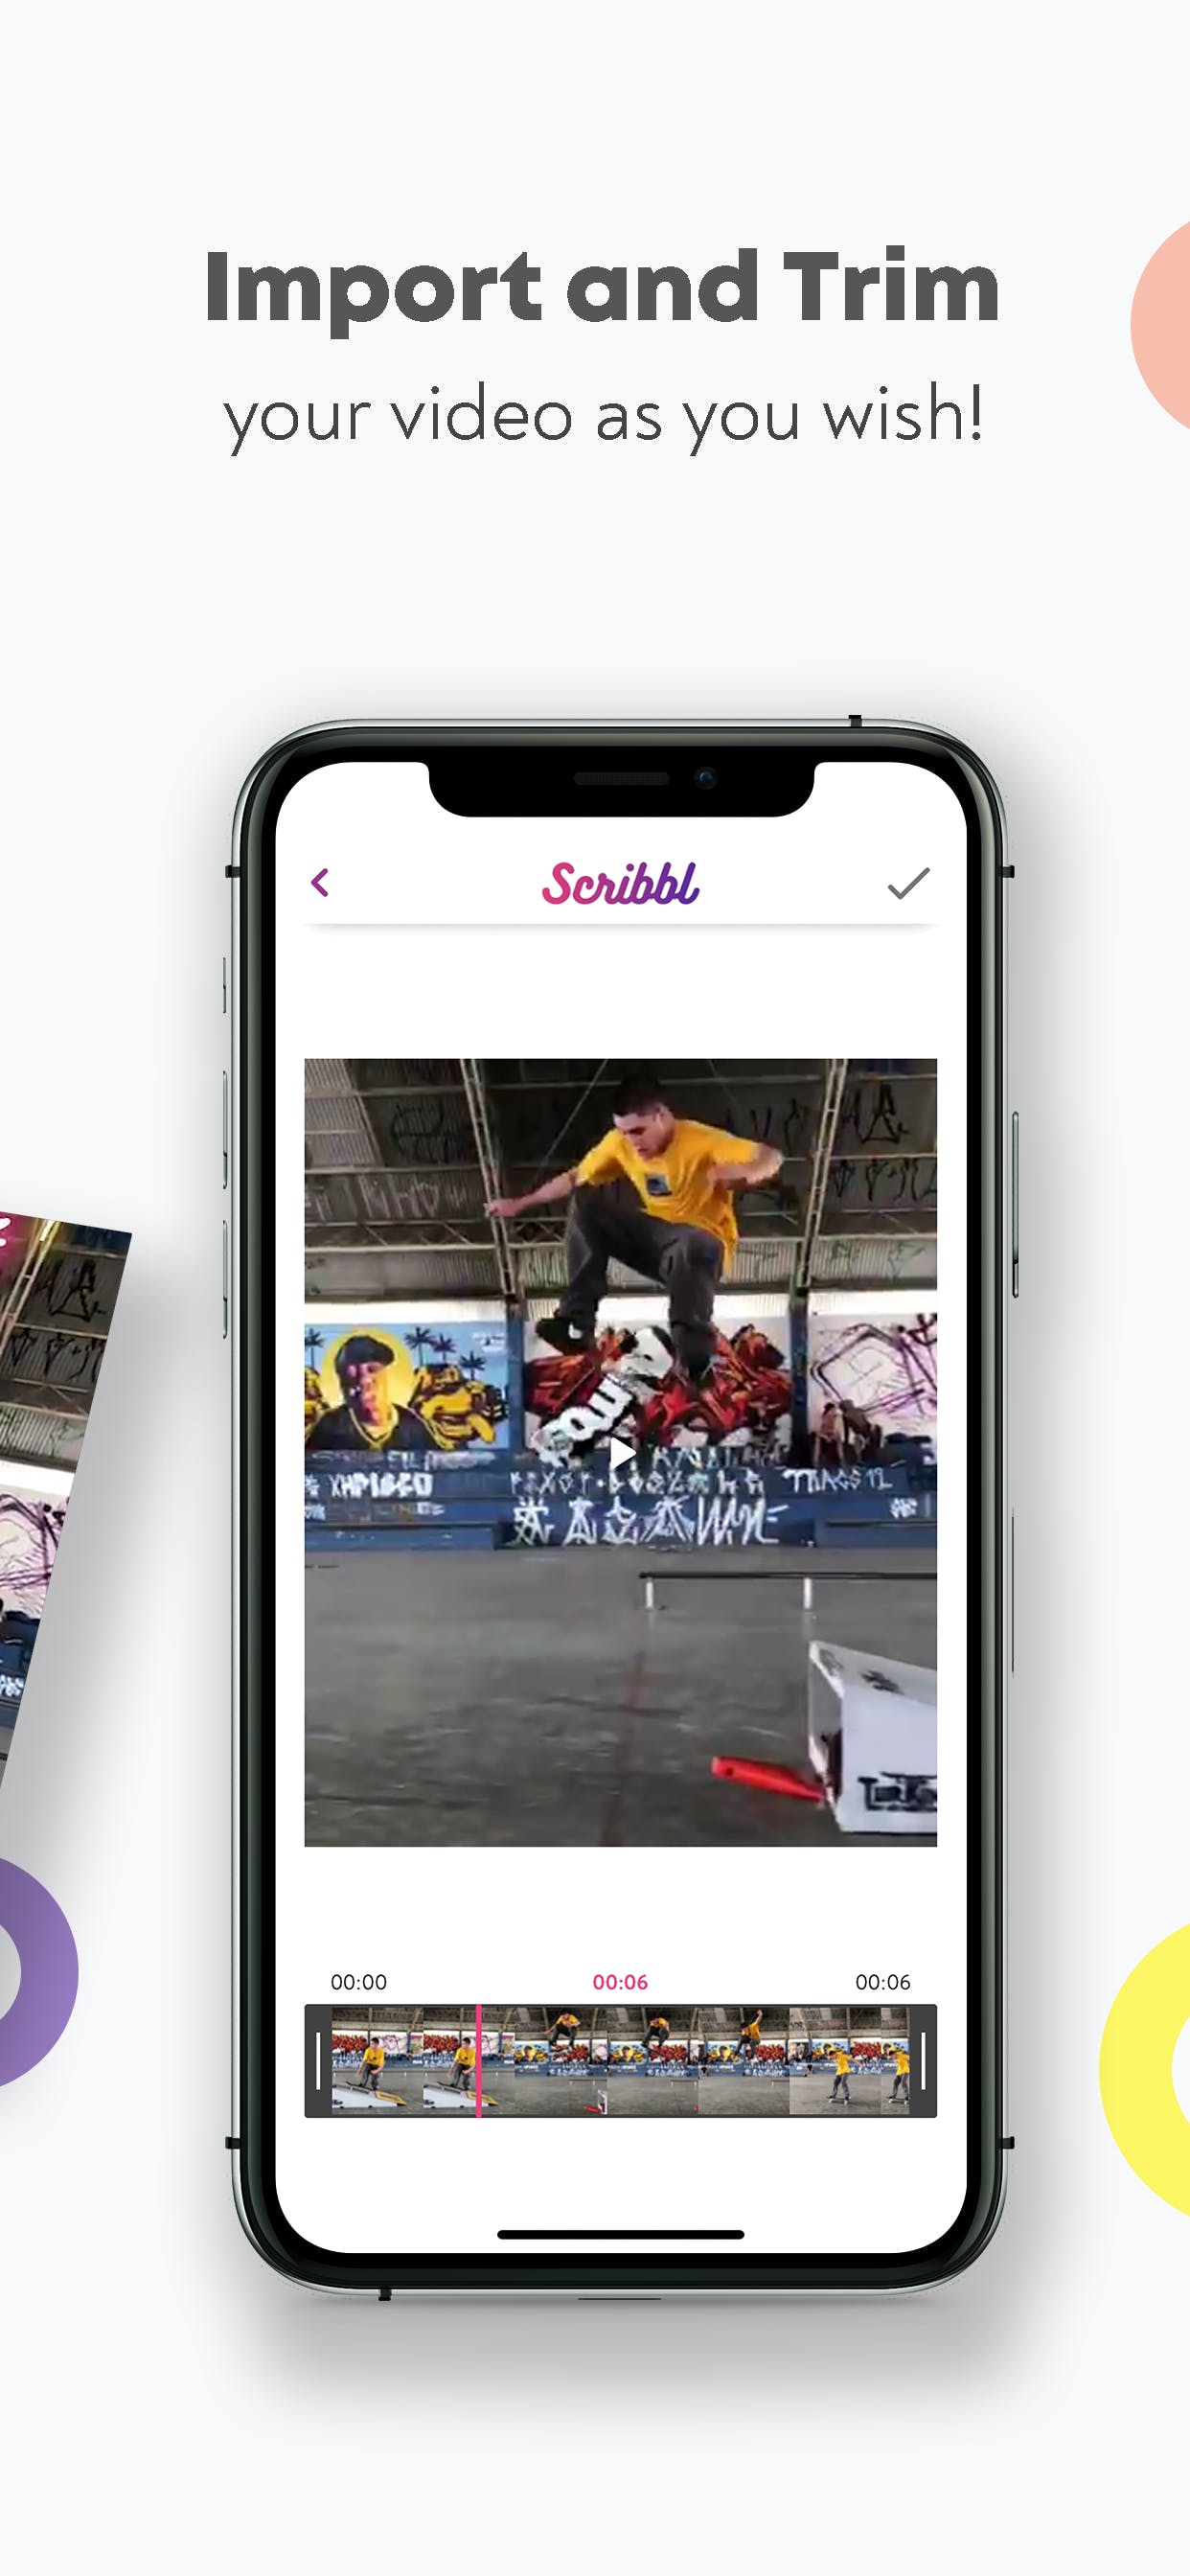 Scribbl - Scribble animations on your videos | Product Hunt